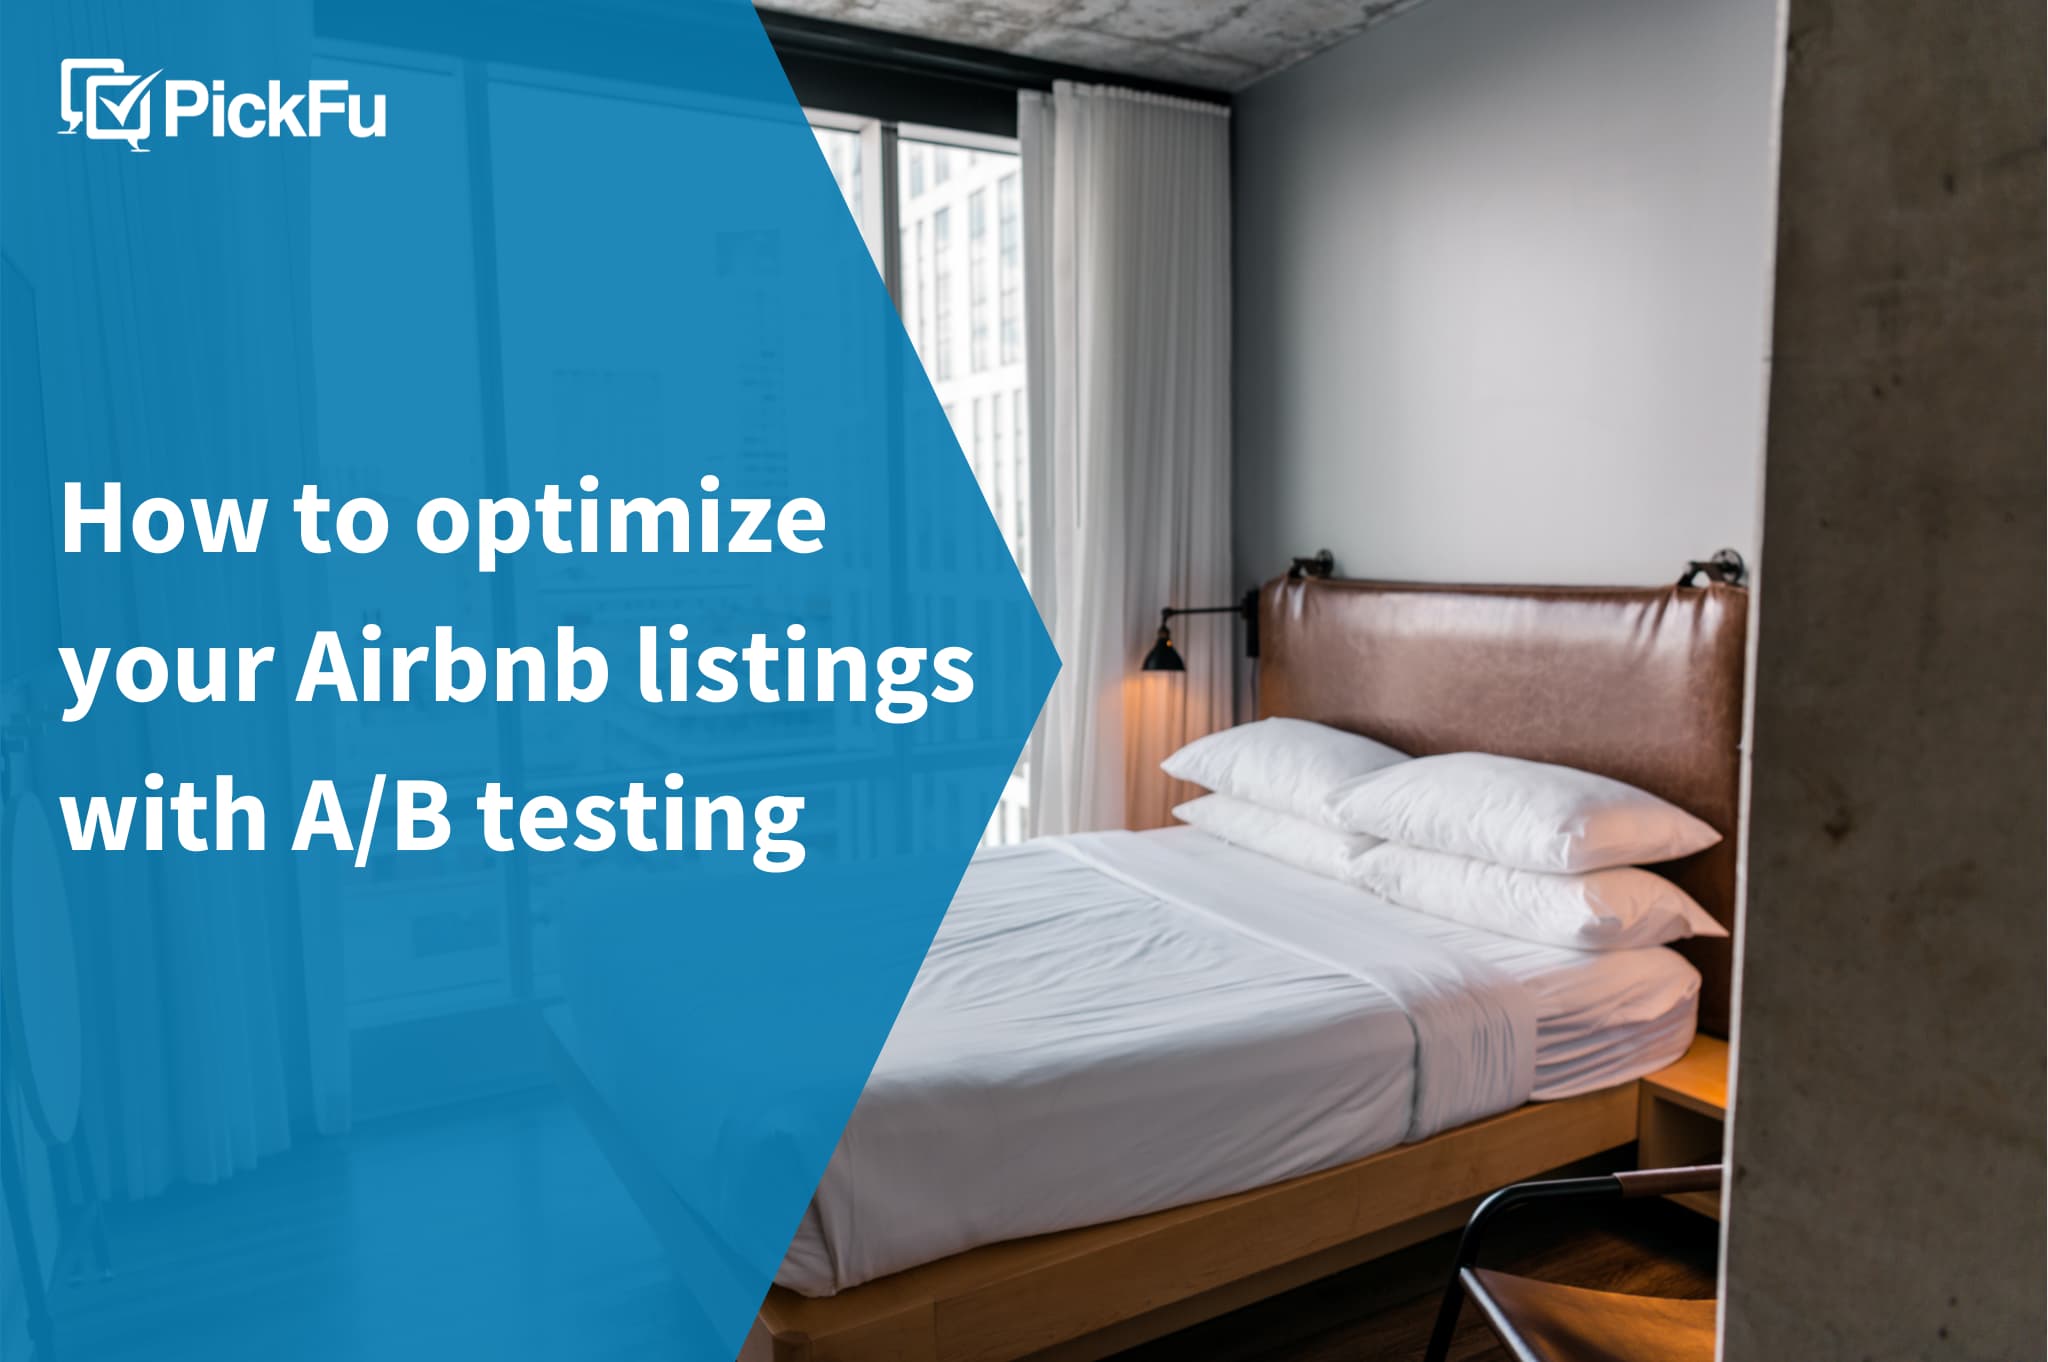 How to list your hotel on Airbnb?